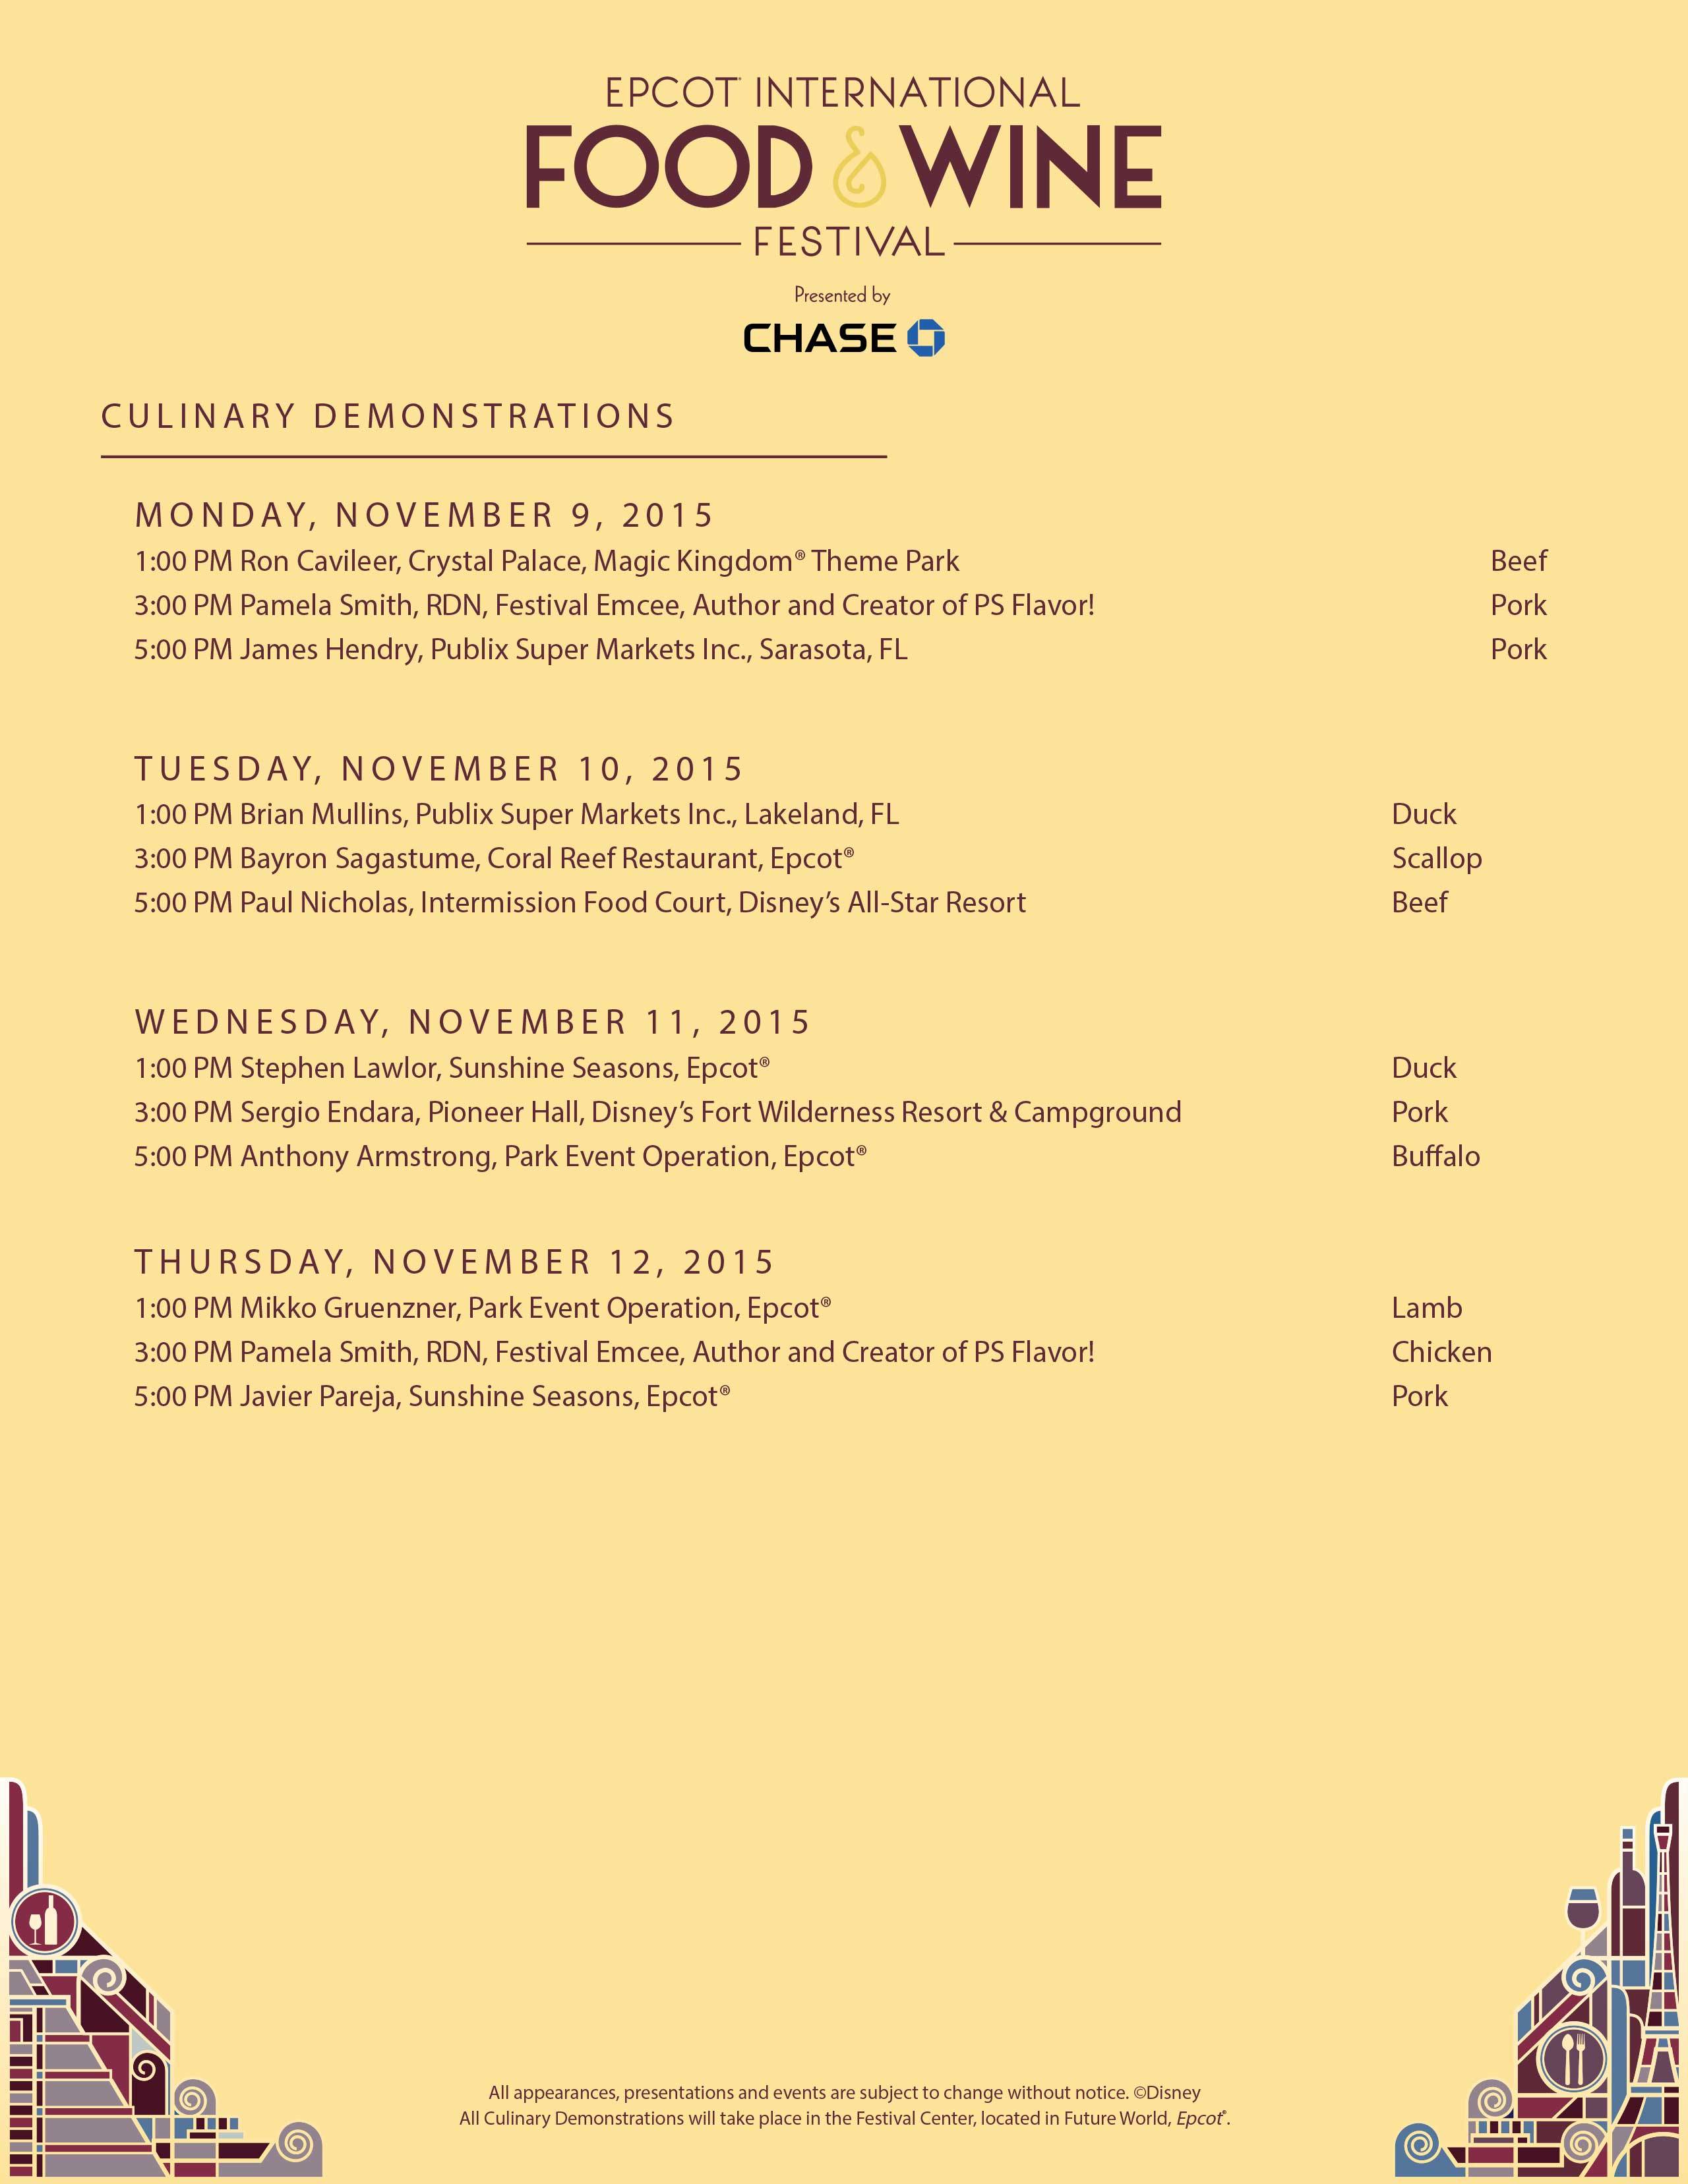 2015 Epcot Food and Wine Festival Culinary Demonstrations schedule